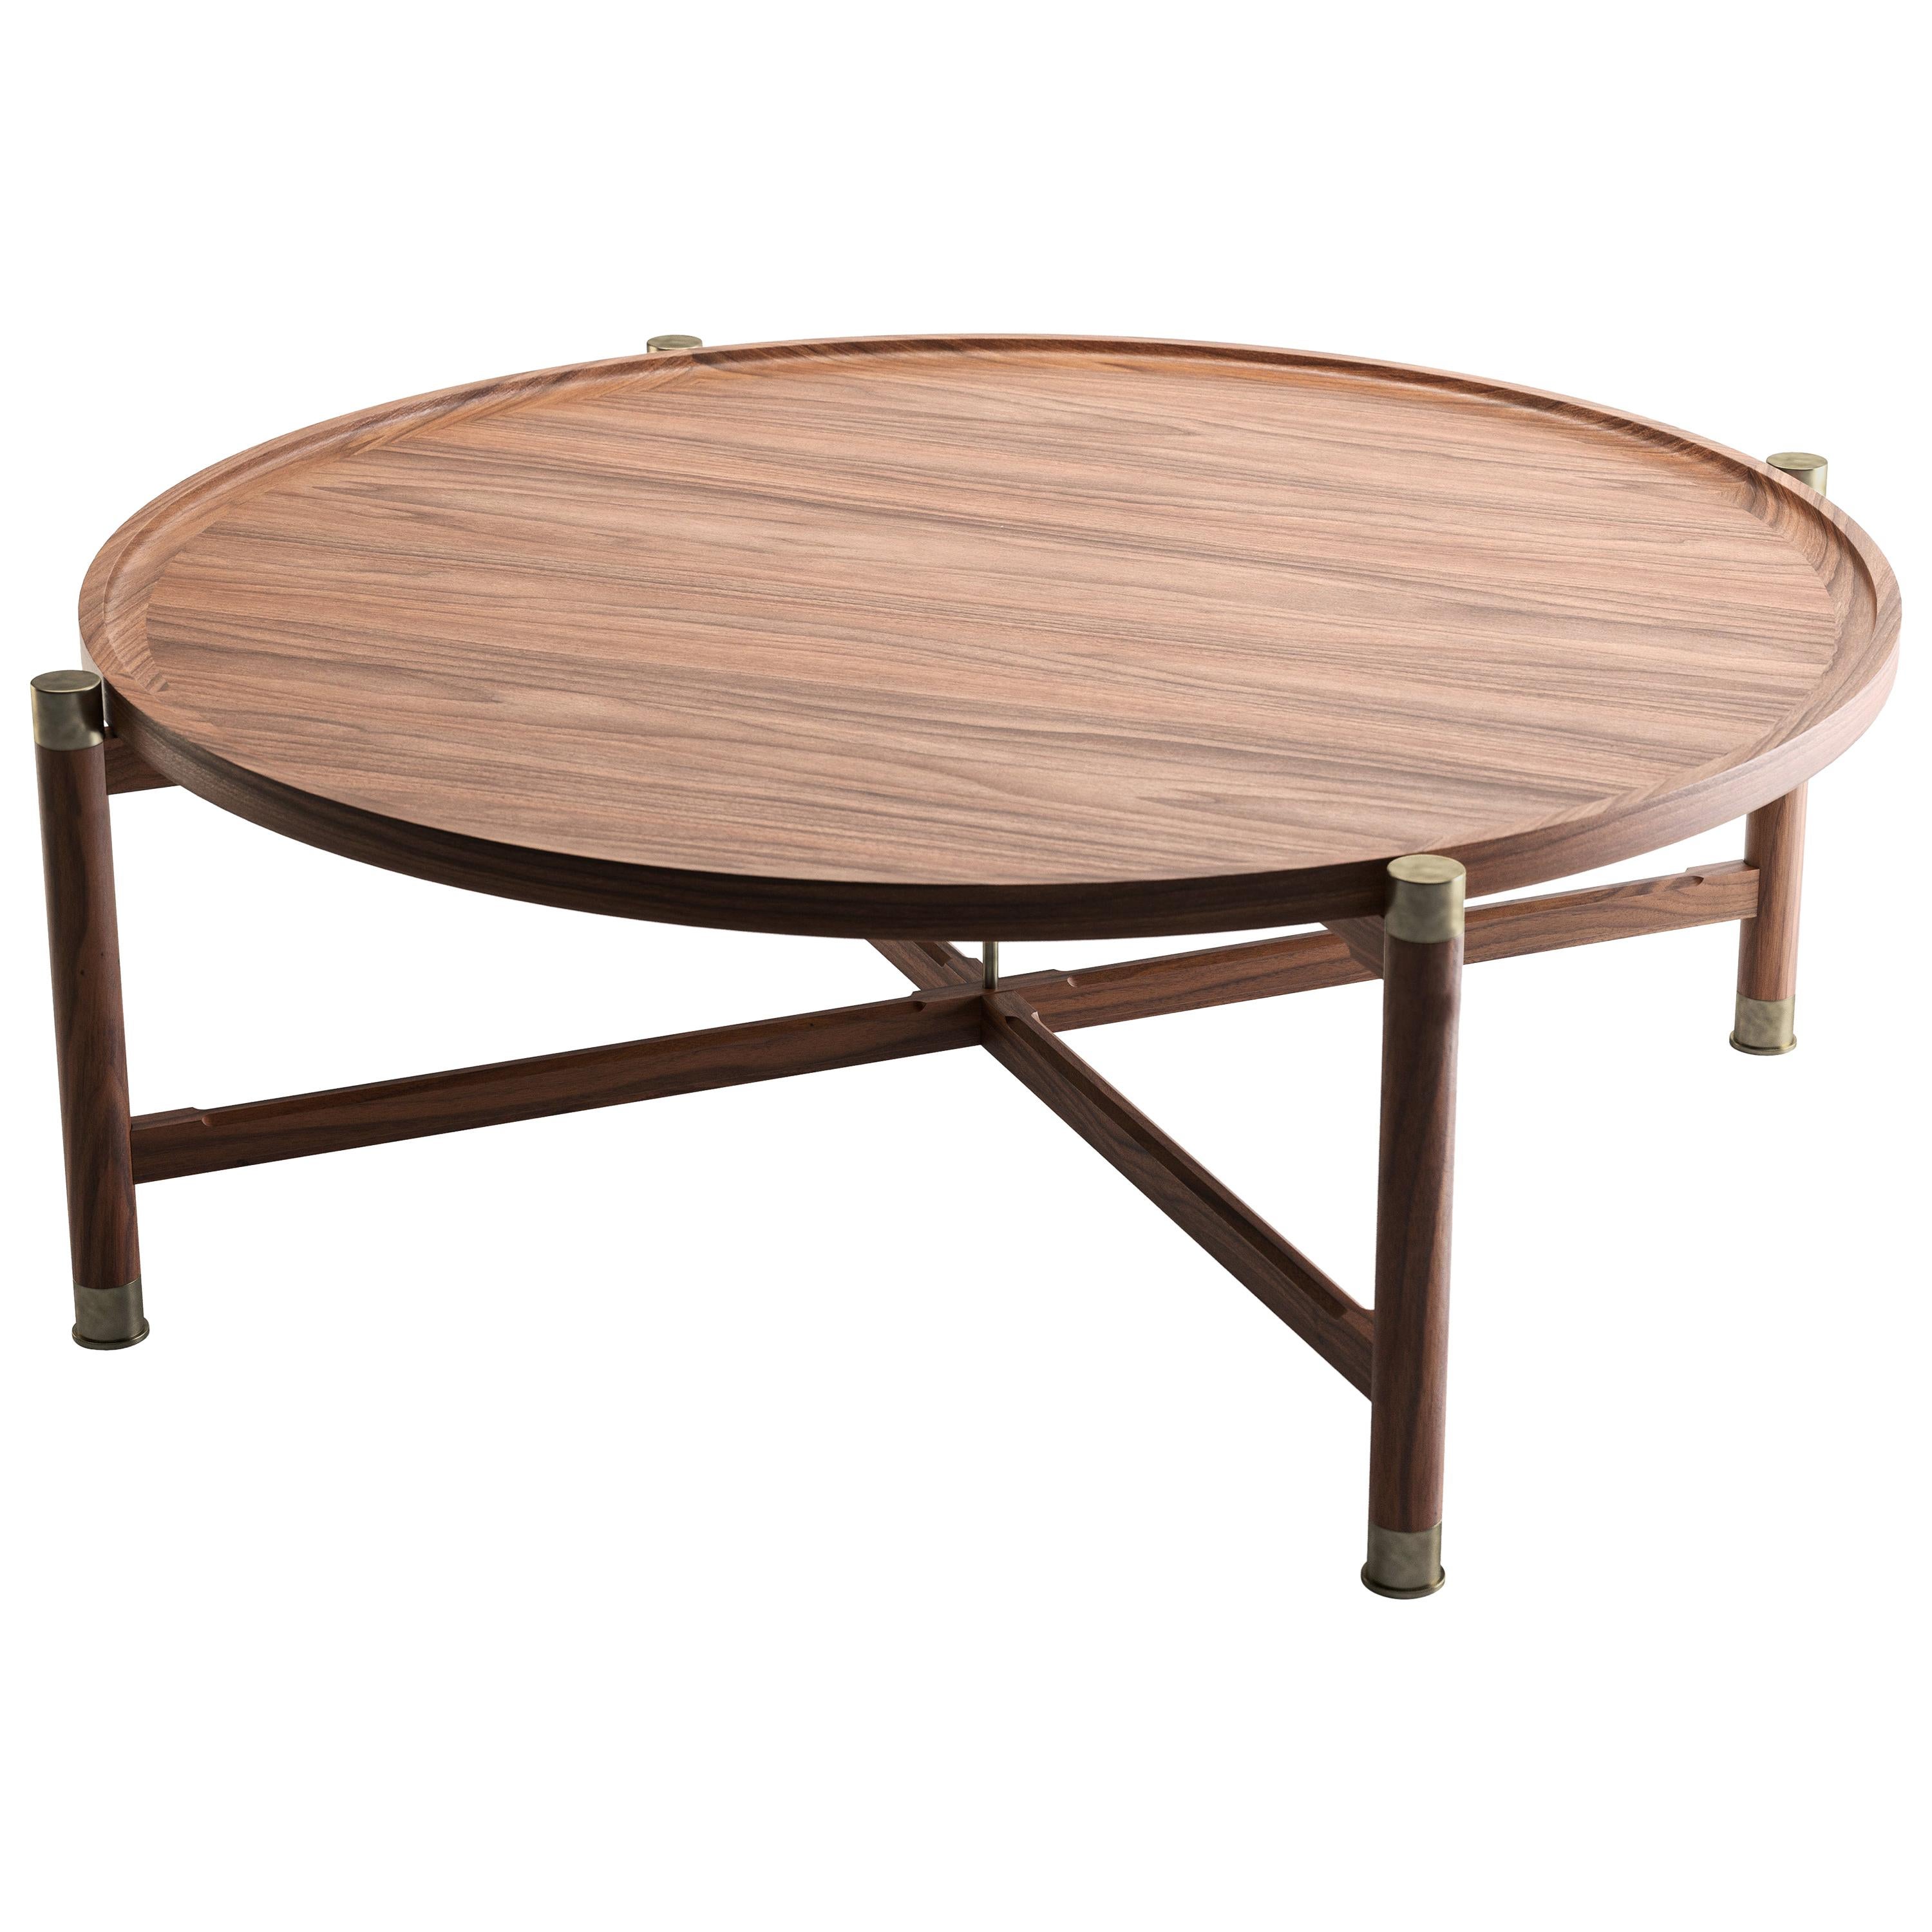 Otto Round Coffee Table in Light Walnut with Antique Brass Fittings and Stem For Sale